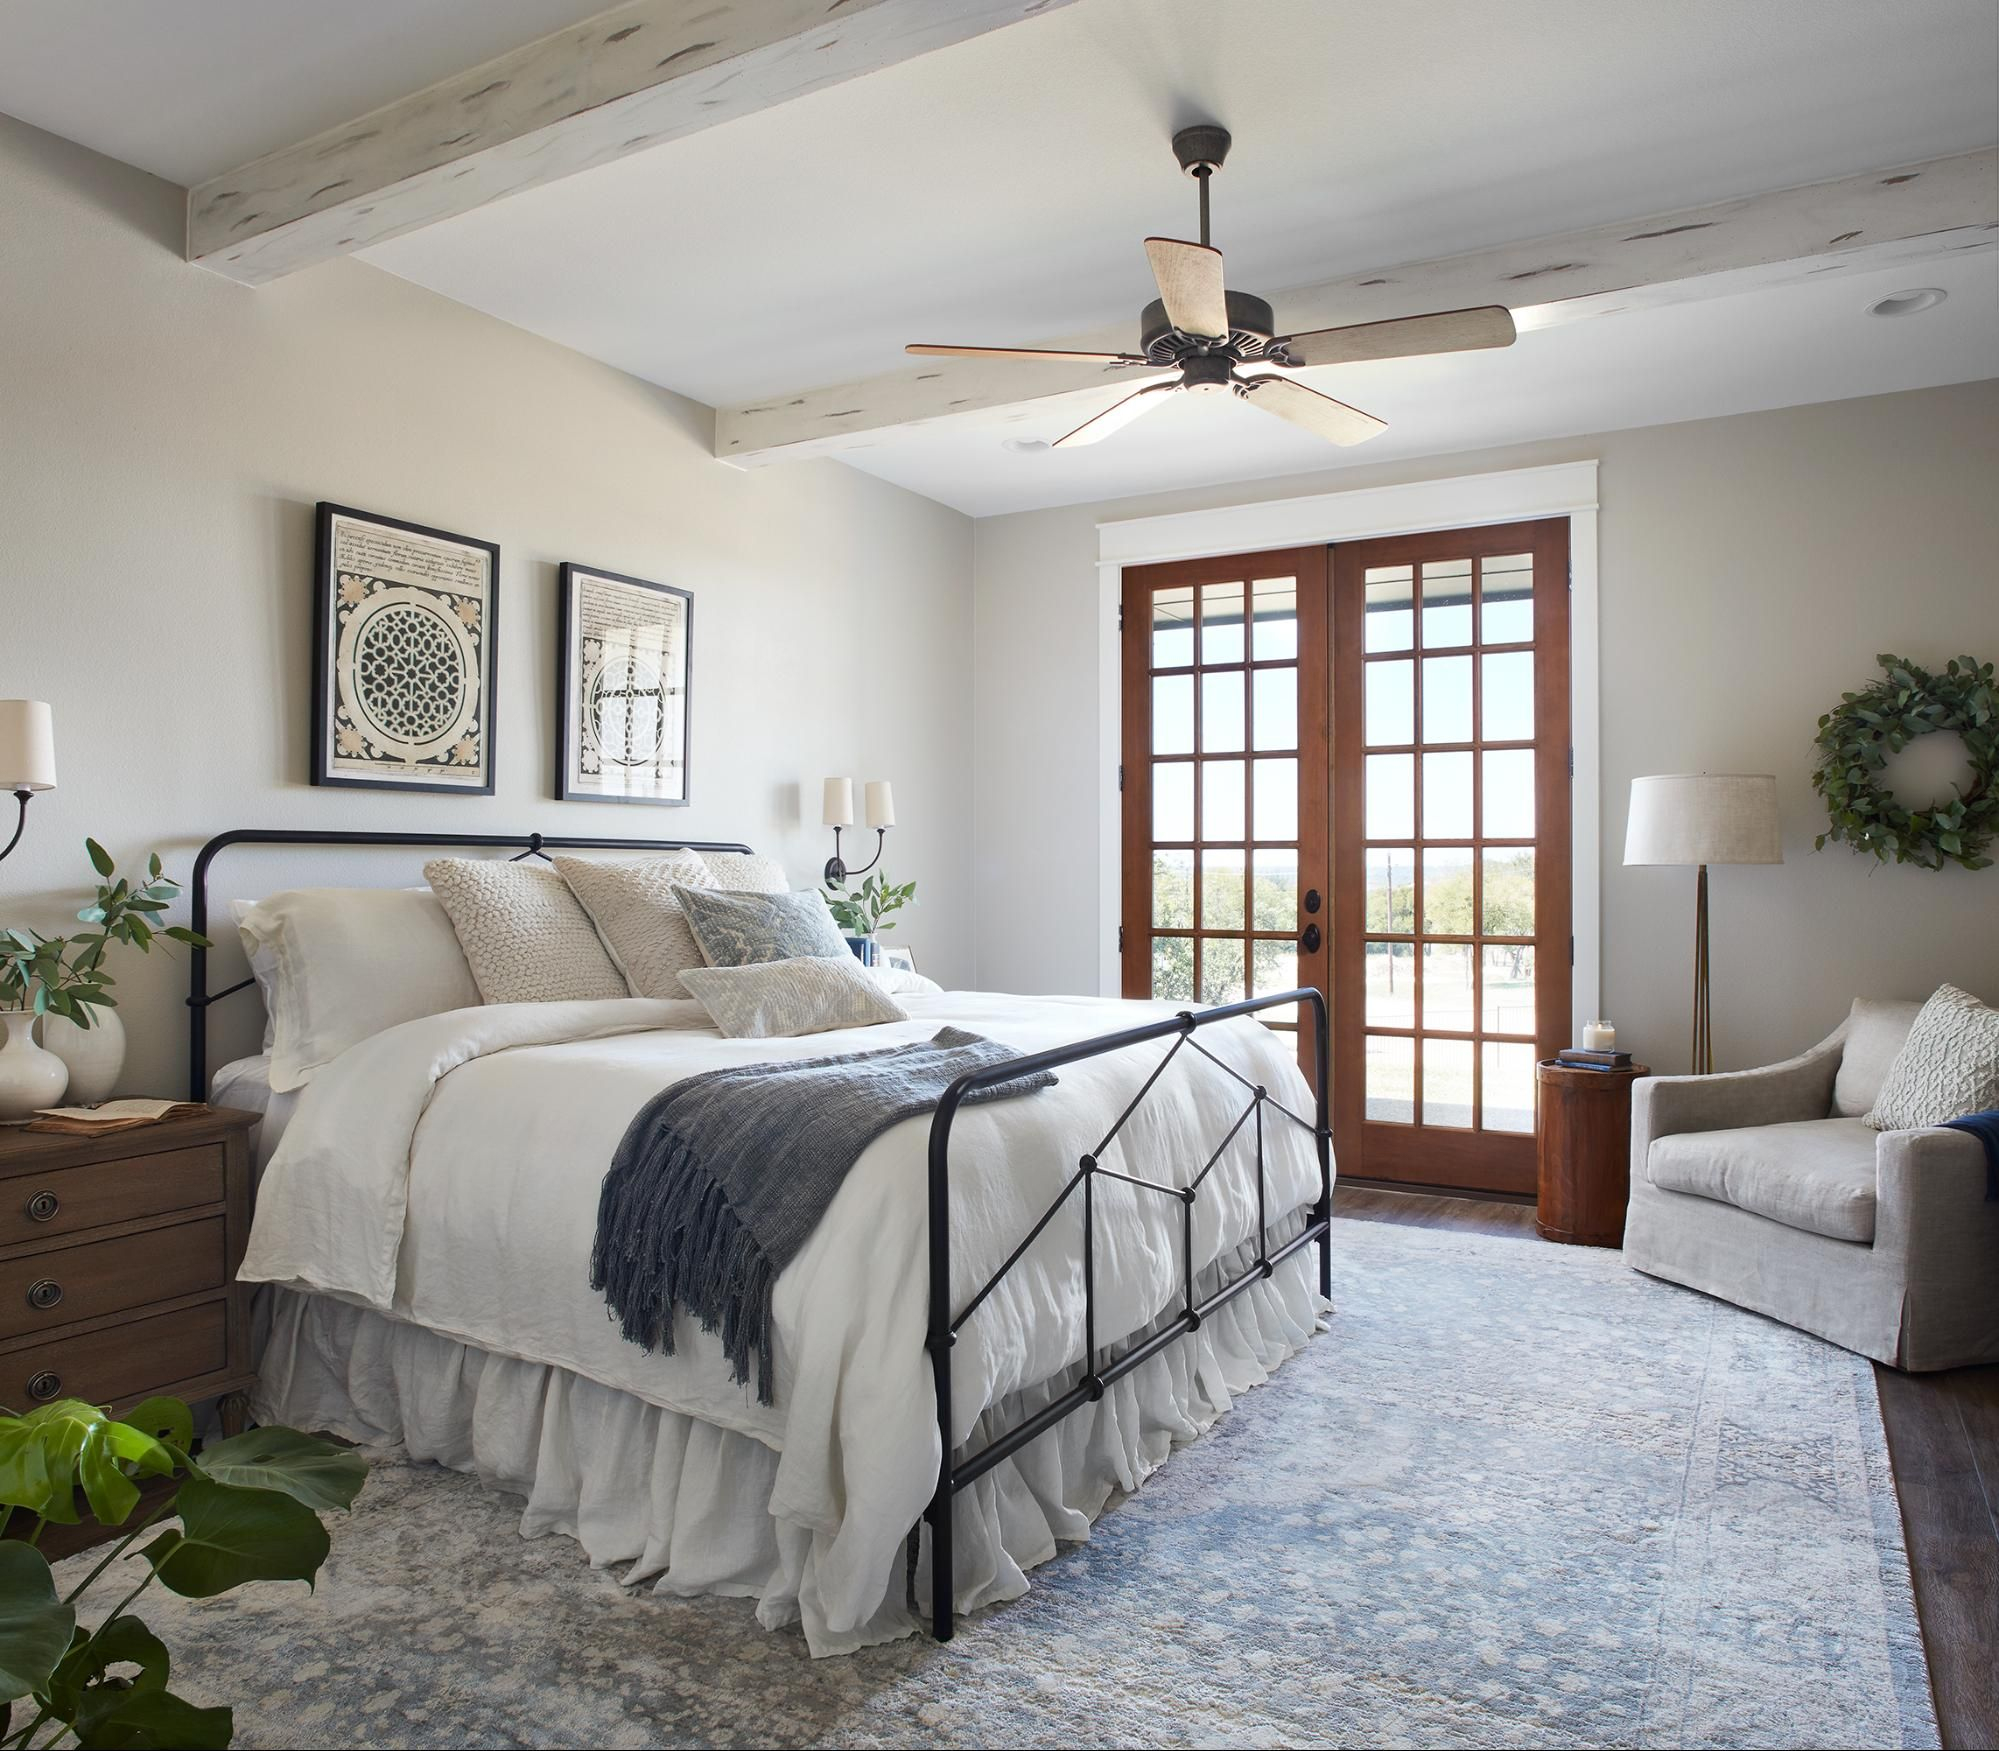 News And Stories From Joanna Gaines  Master Bedrooms Decor, Bedroom bei Fixer Upper 5. Kind